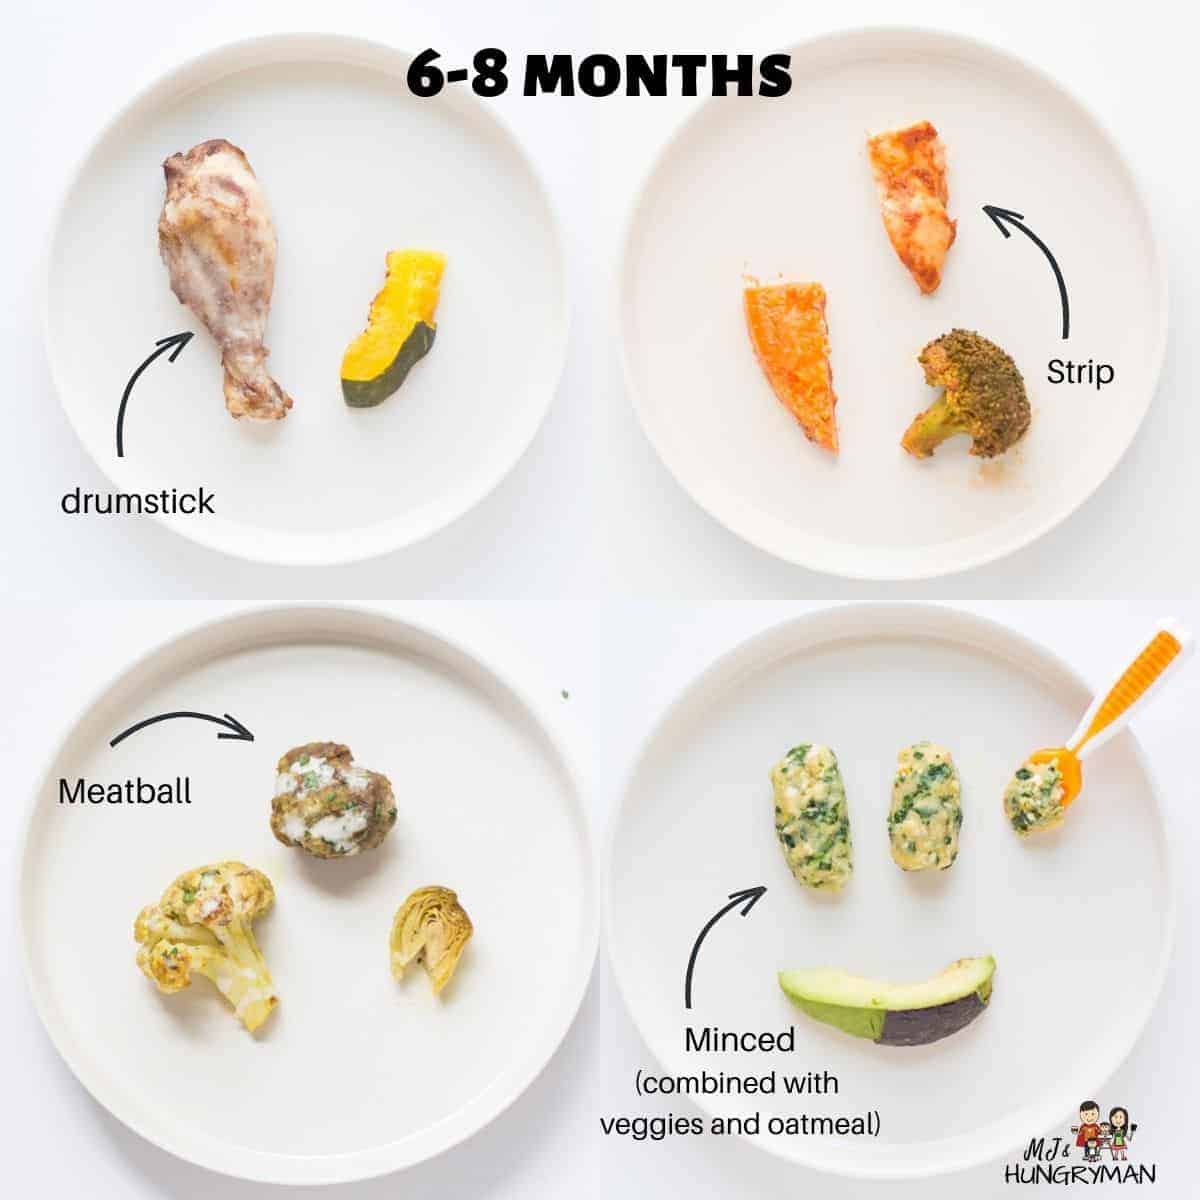 a four image collage showing how to serve to 6-8 month olds - drumstick, thick strip, meatball, minced and added to oatmeal.